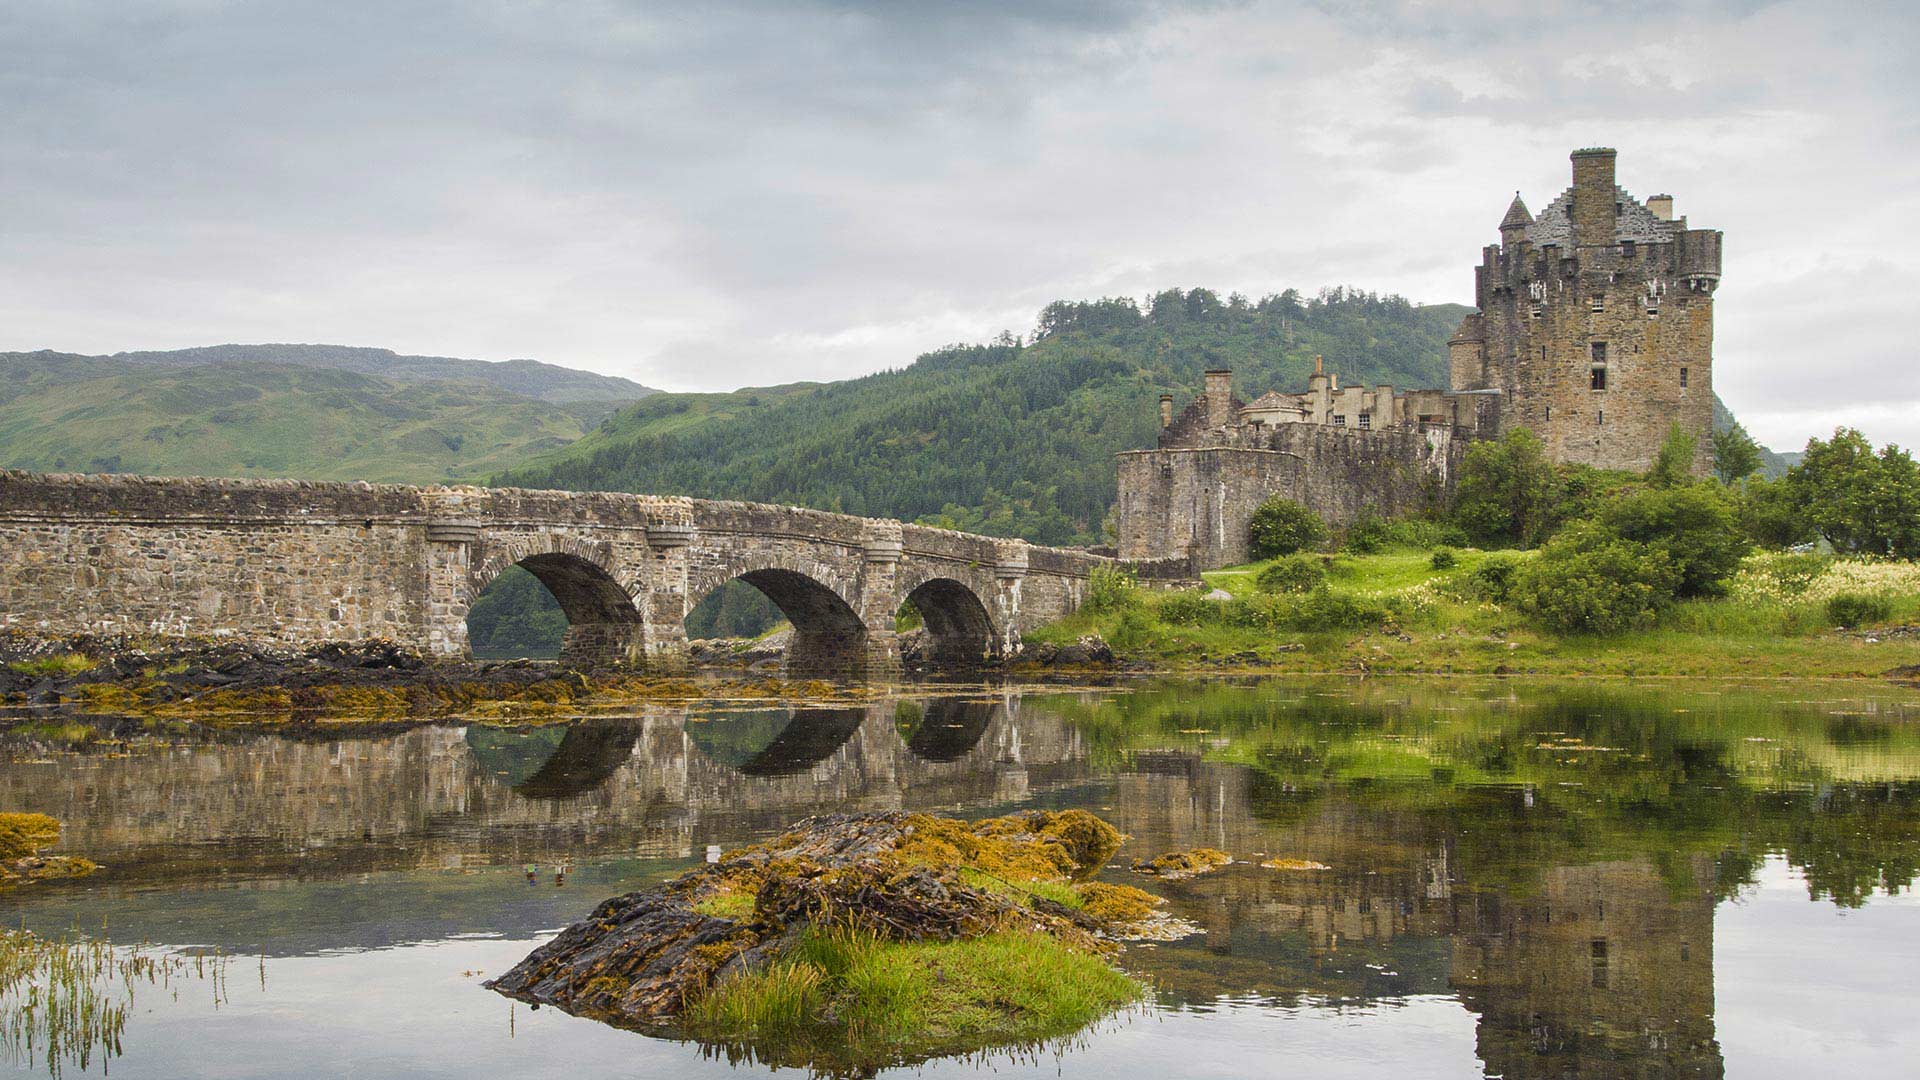 Eilean Donan Castle in the Scottish Highlands, a historical site visit on the Scotland and the Highlands Tour by Women Traveling the World